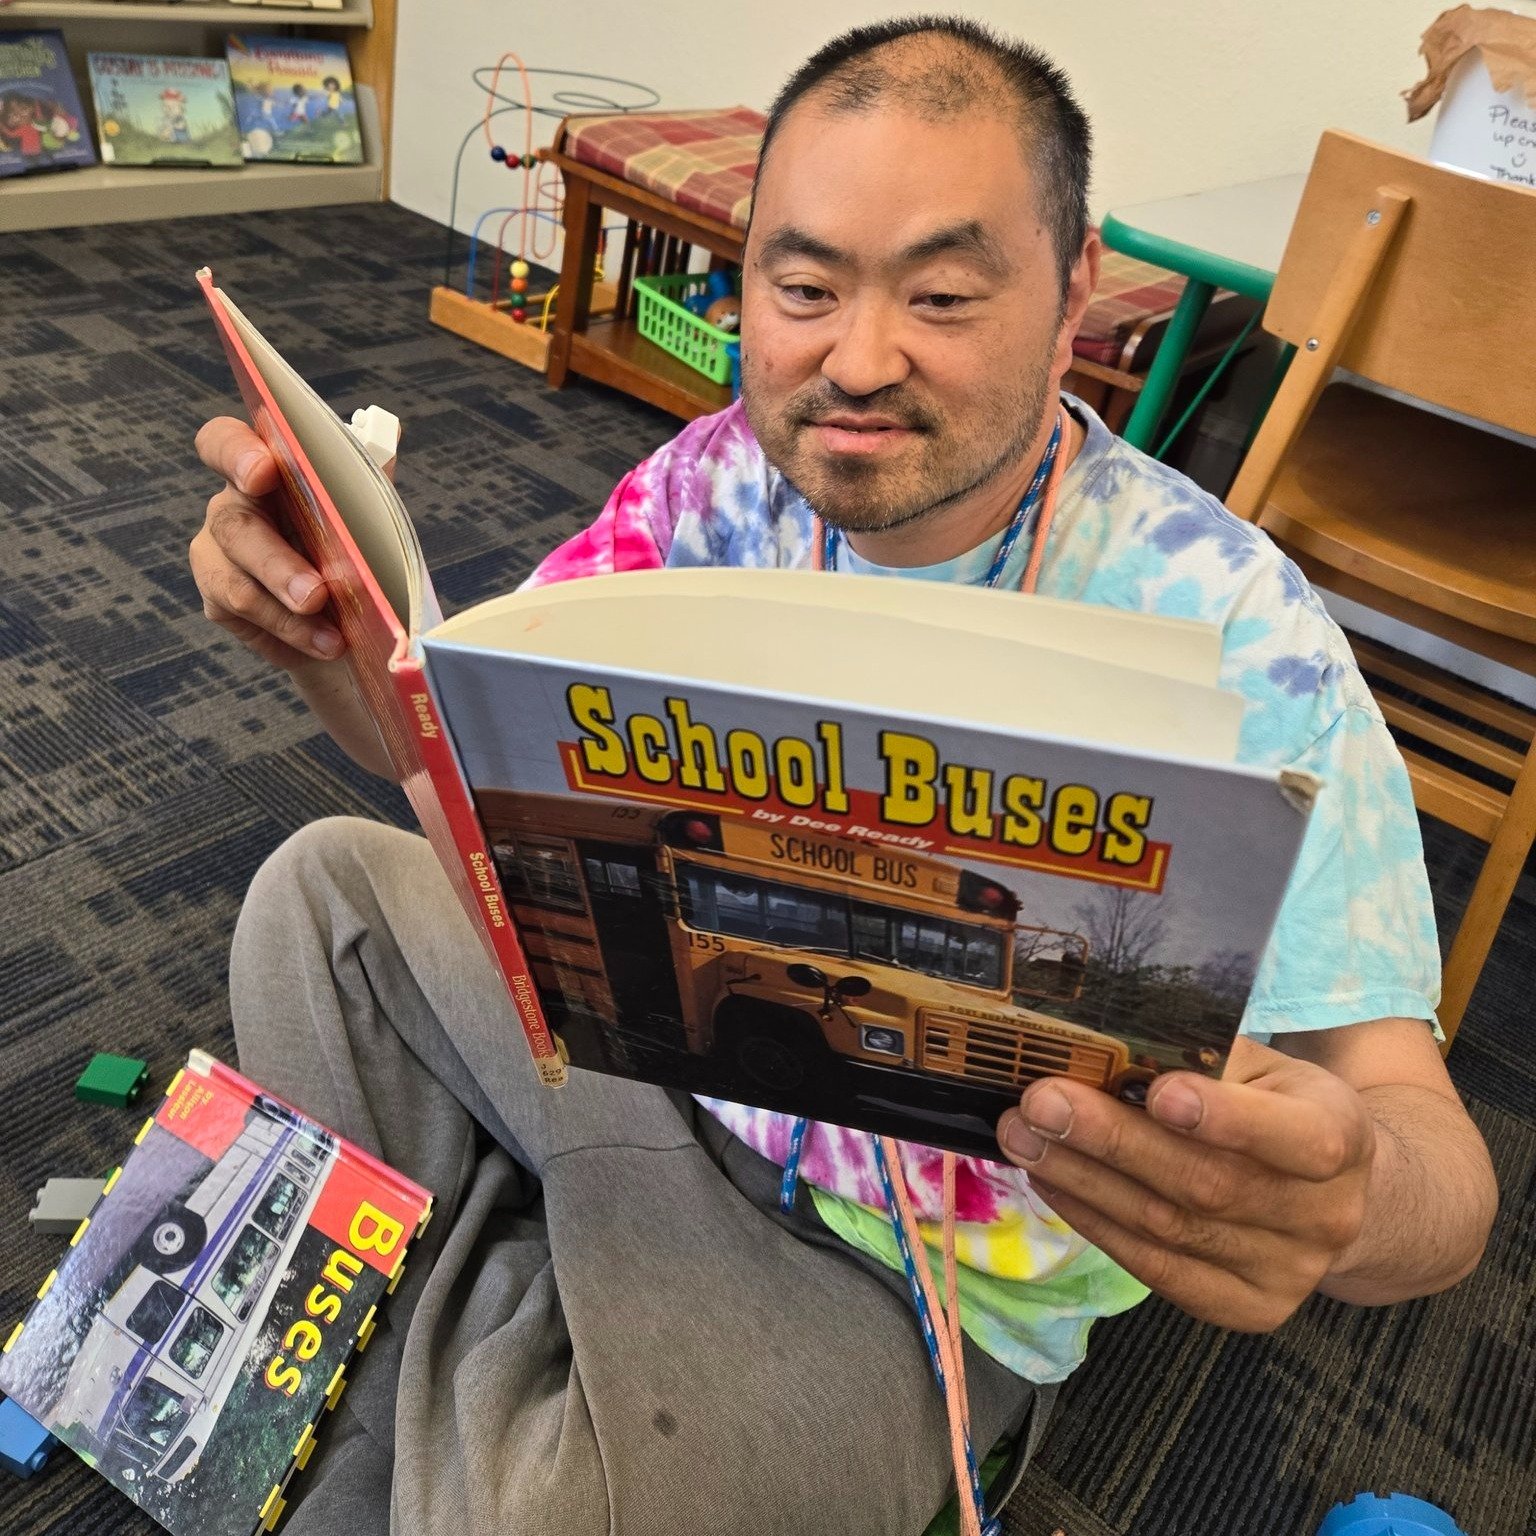 Matthew Loves Buses, Part 2:
The librarians at the Sauk Centre Public Library are amazing! When they heard about Matthew's bus garage tour and how much he loves buses, they did a search of the Great River Regional Library system and ordered 4 bus boo